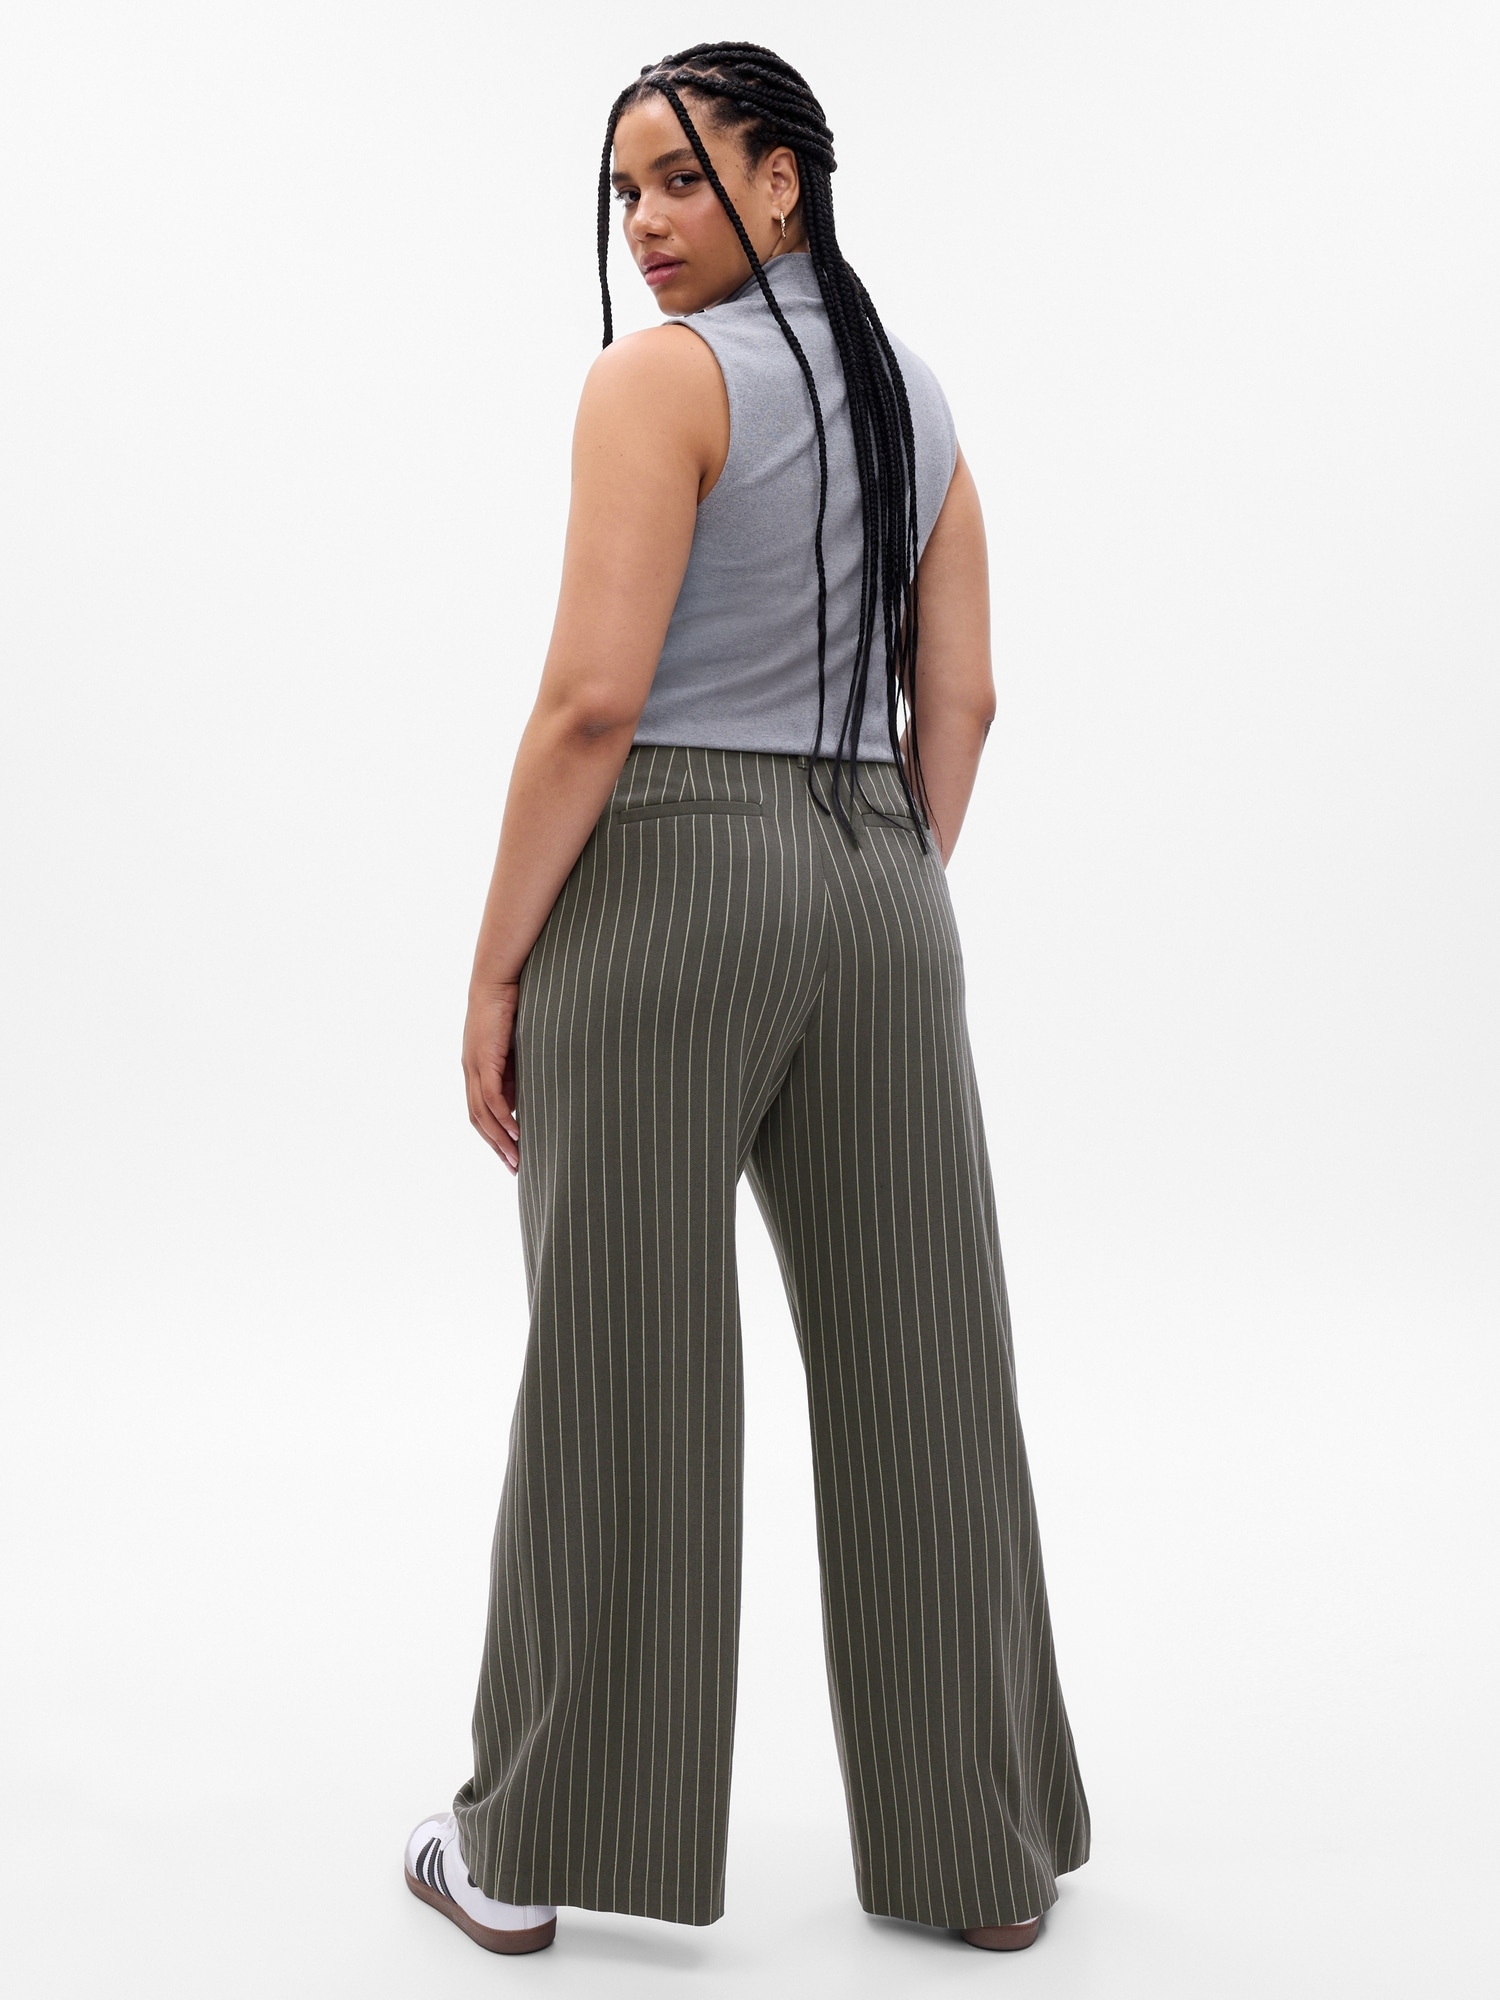 The Solid Color Pleated Pant - Women's High Rise Wide Leg Pleated